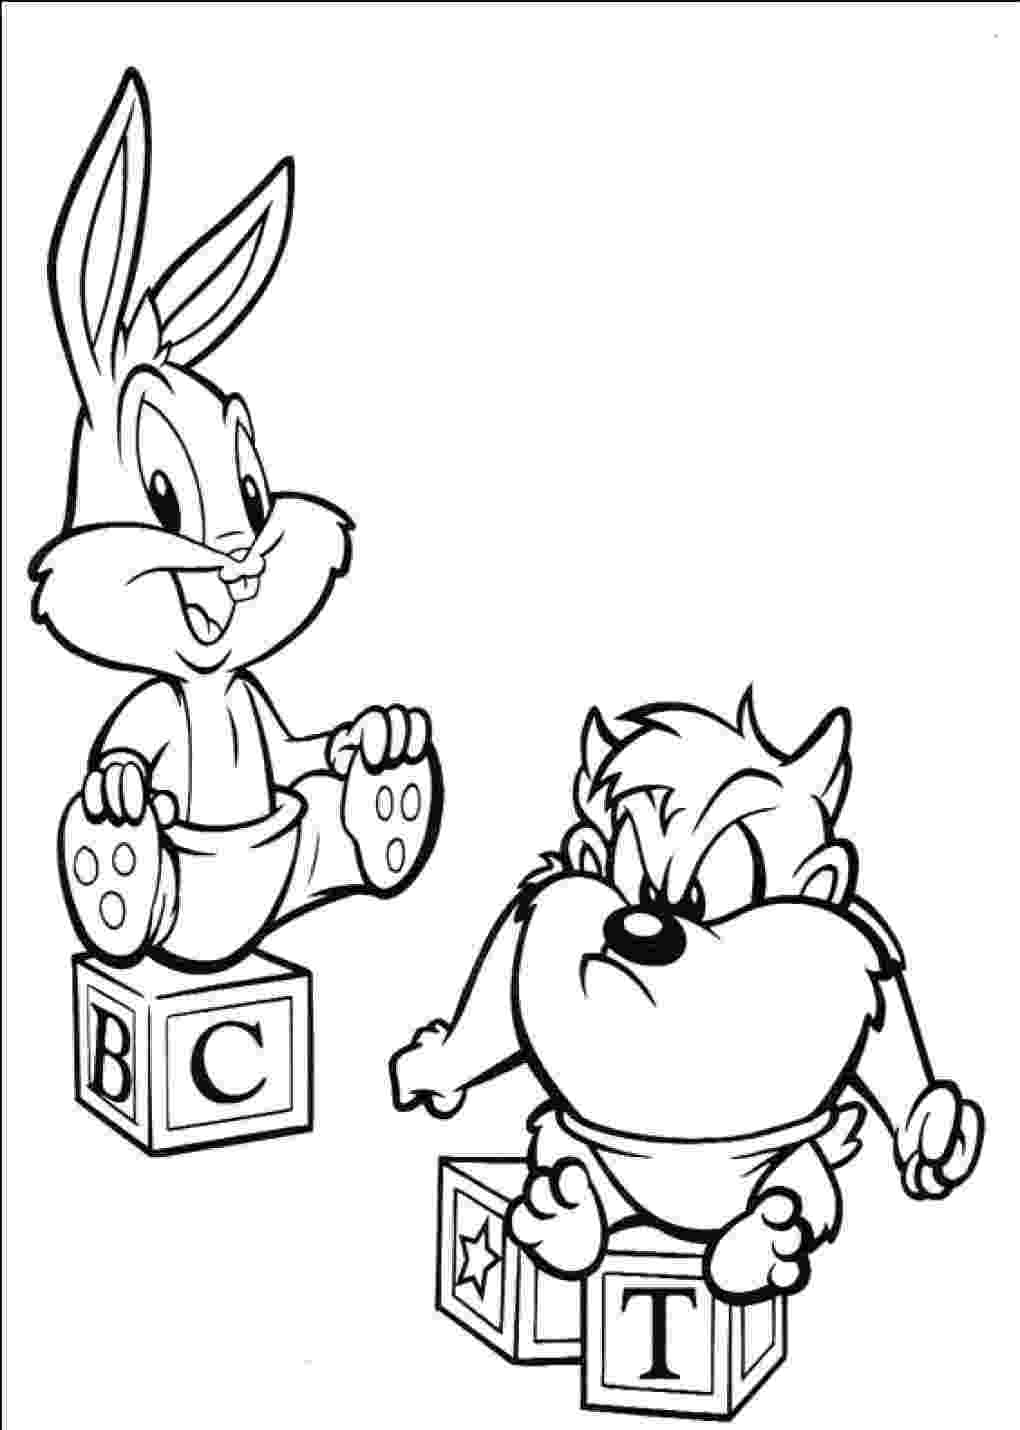 looney tunes coloring pages to print free printable looney tunes coloring pages for kids pages coloring print to tunes looney 